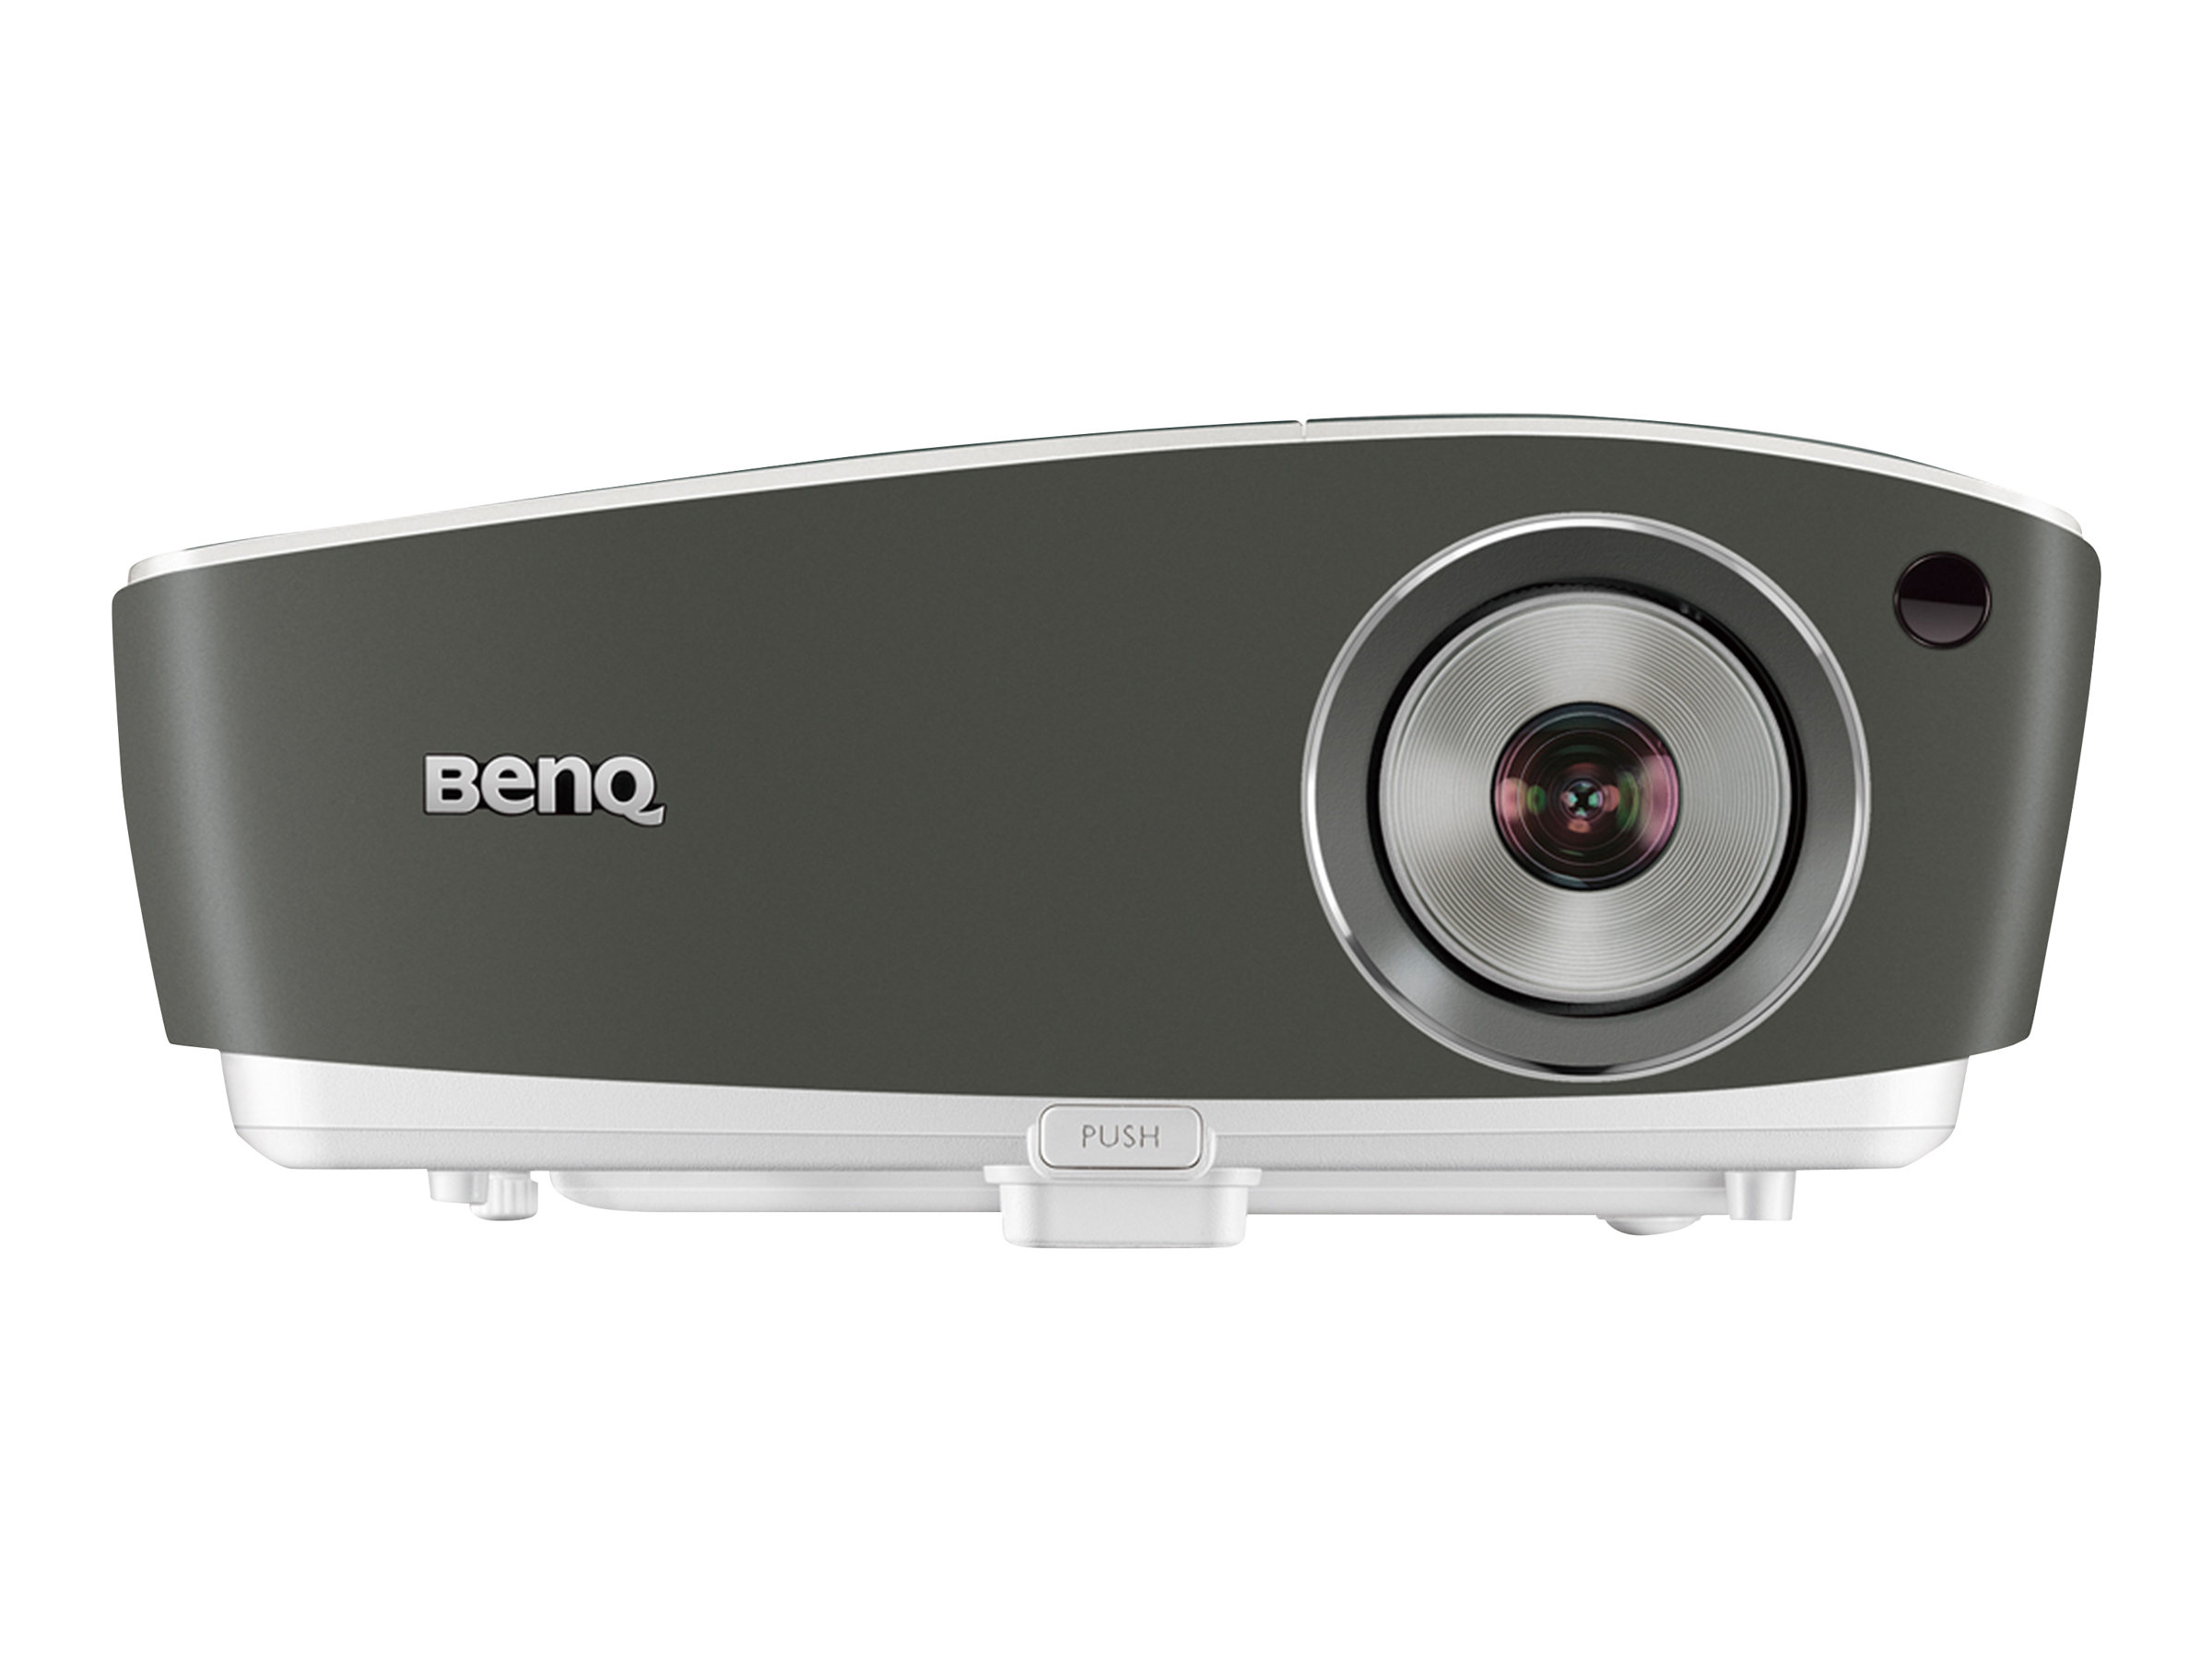 BenQ TH670 3D Ready DLP Projector, 16:9 - image 1 of 6